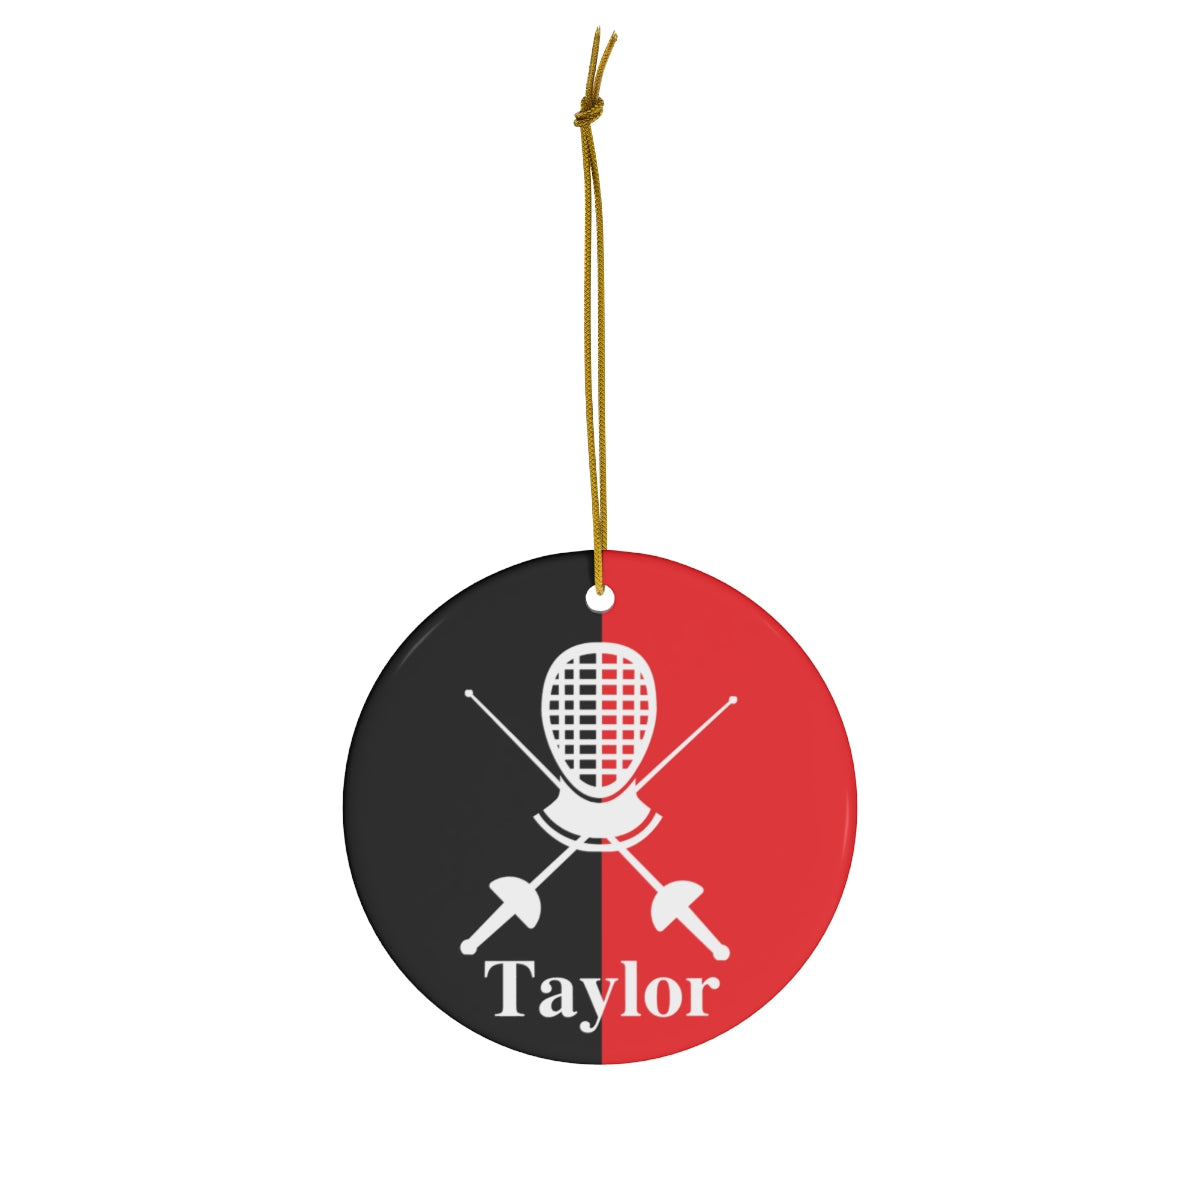 Personalized Fencing Christmas Ornament